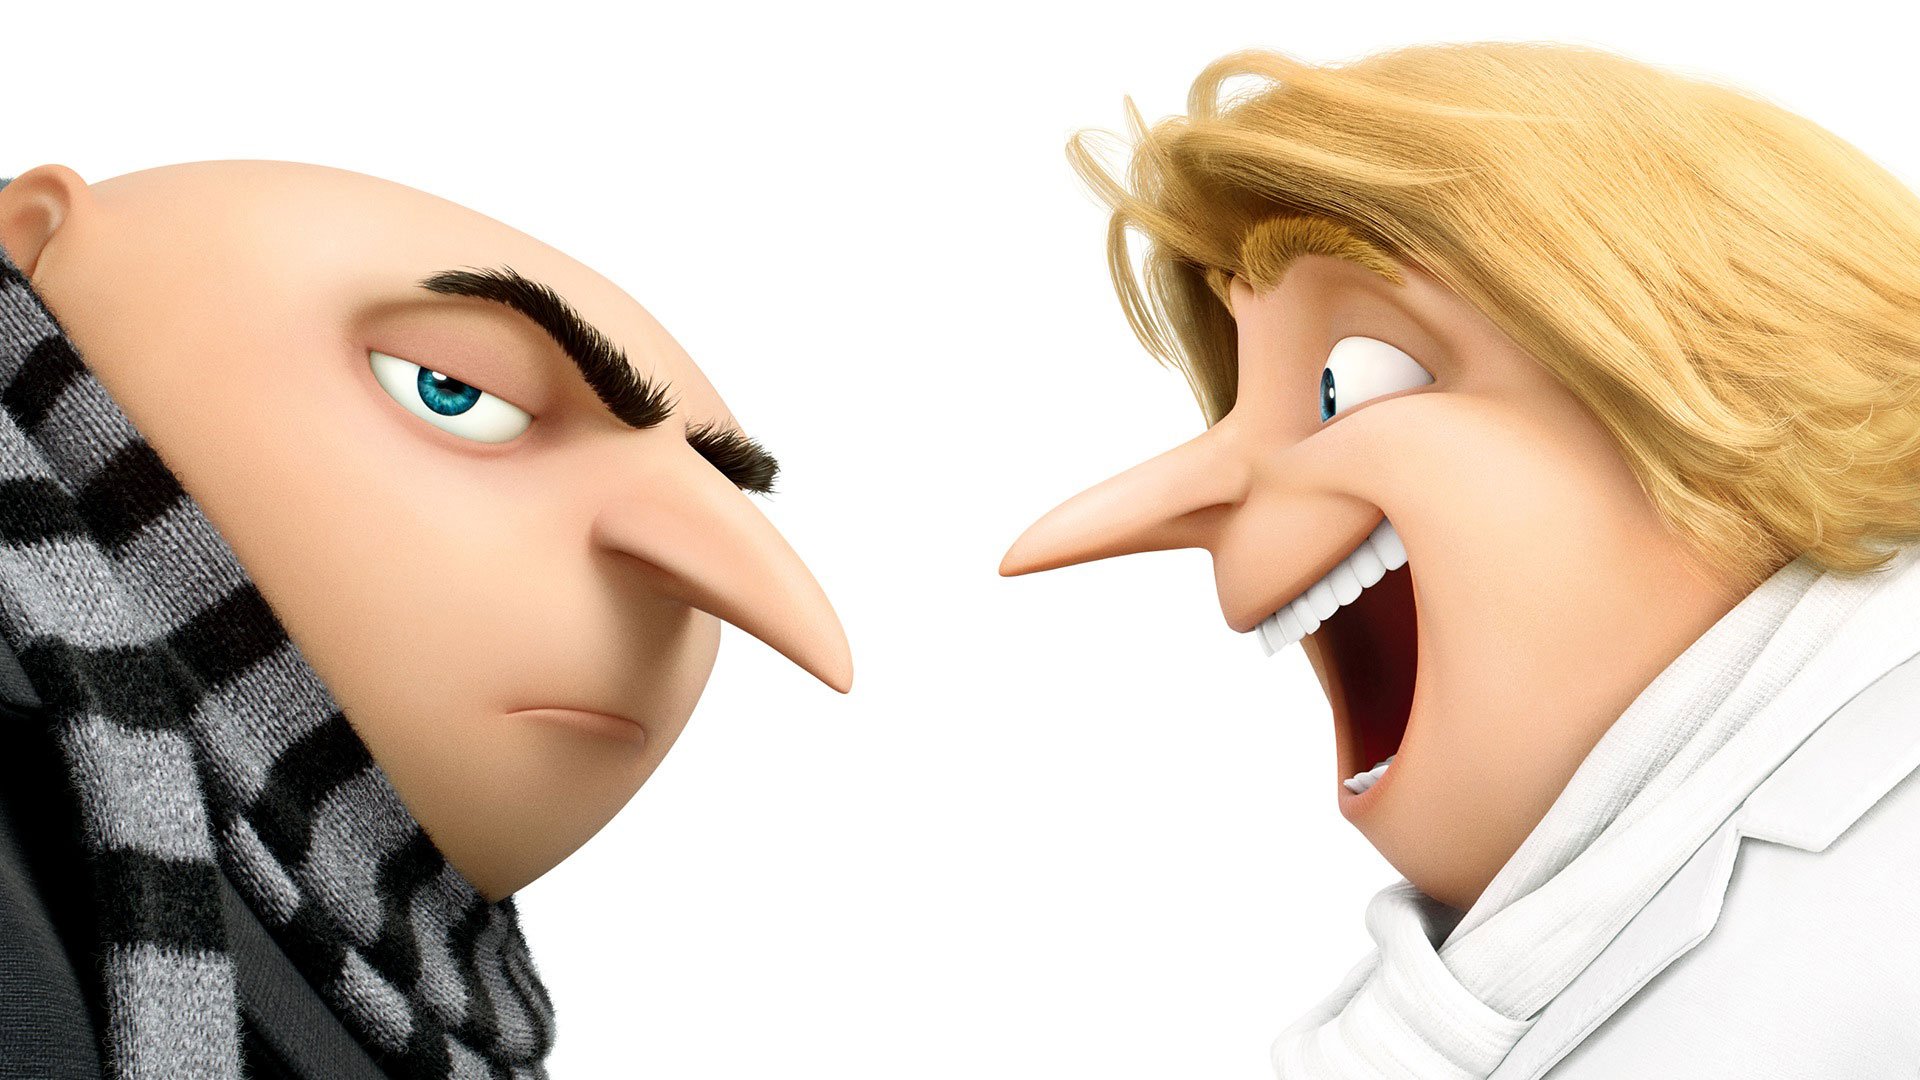 Despicable Me 3 Gru New Wallpapers HD.